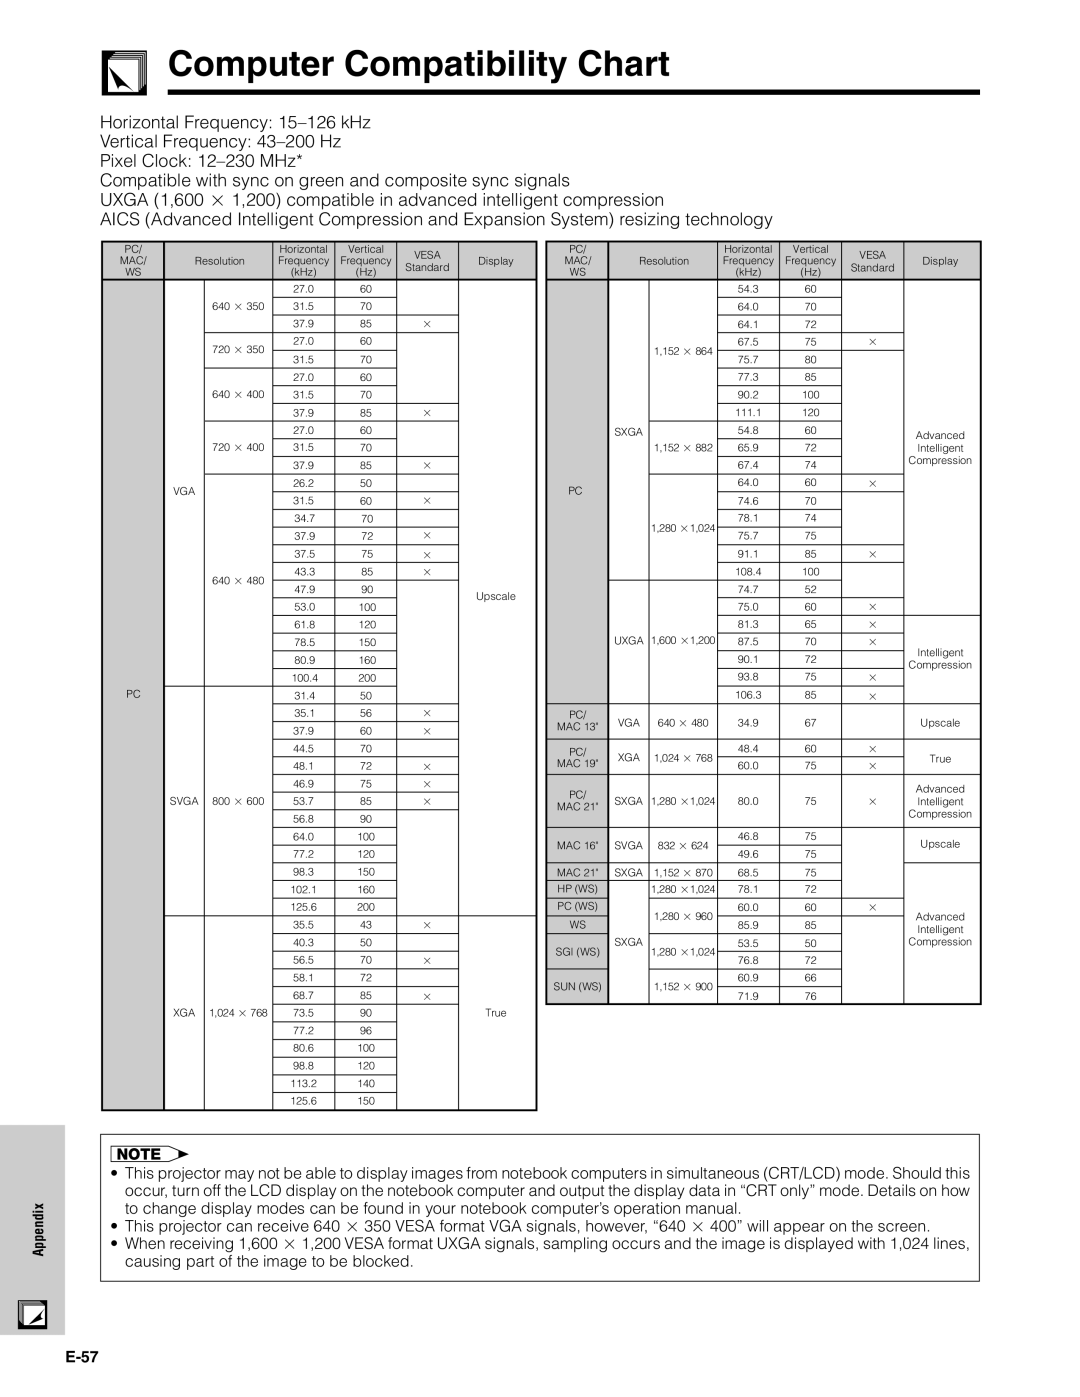 Sharp XG-C40XU operation manual Computer Compatibility Chart, Horizontal Frequency 15-126 kHz Vertical Frequency 43-200 Hz 